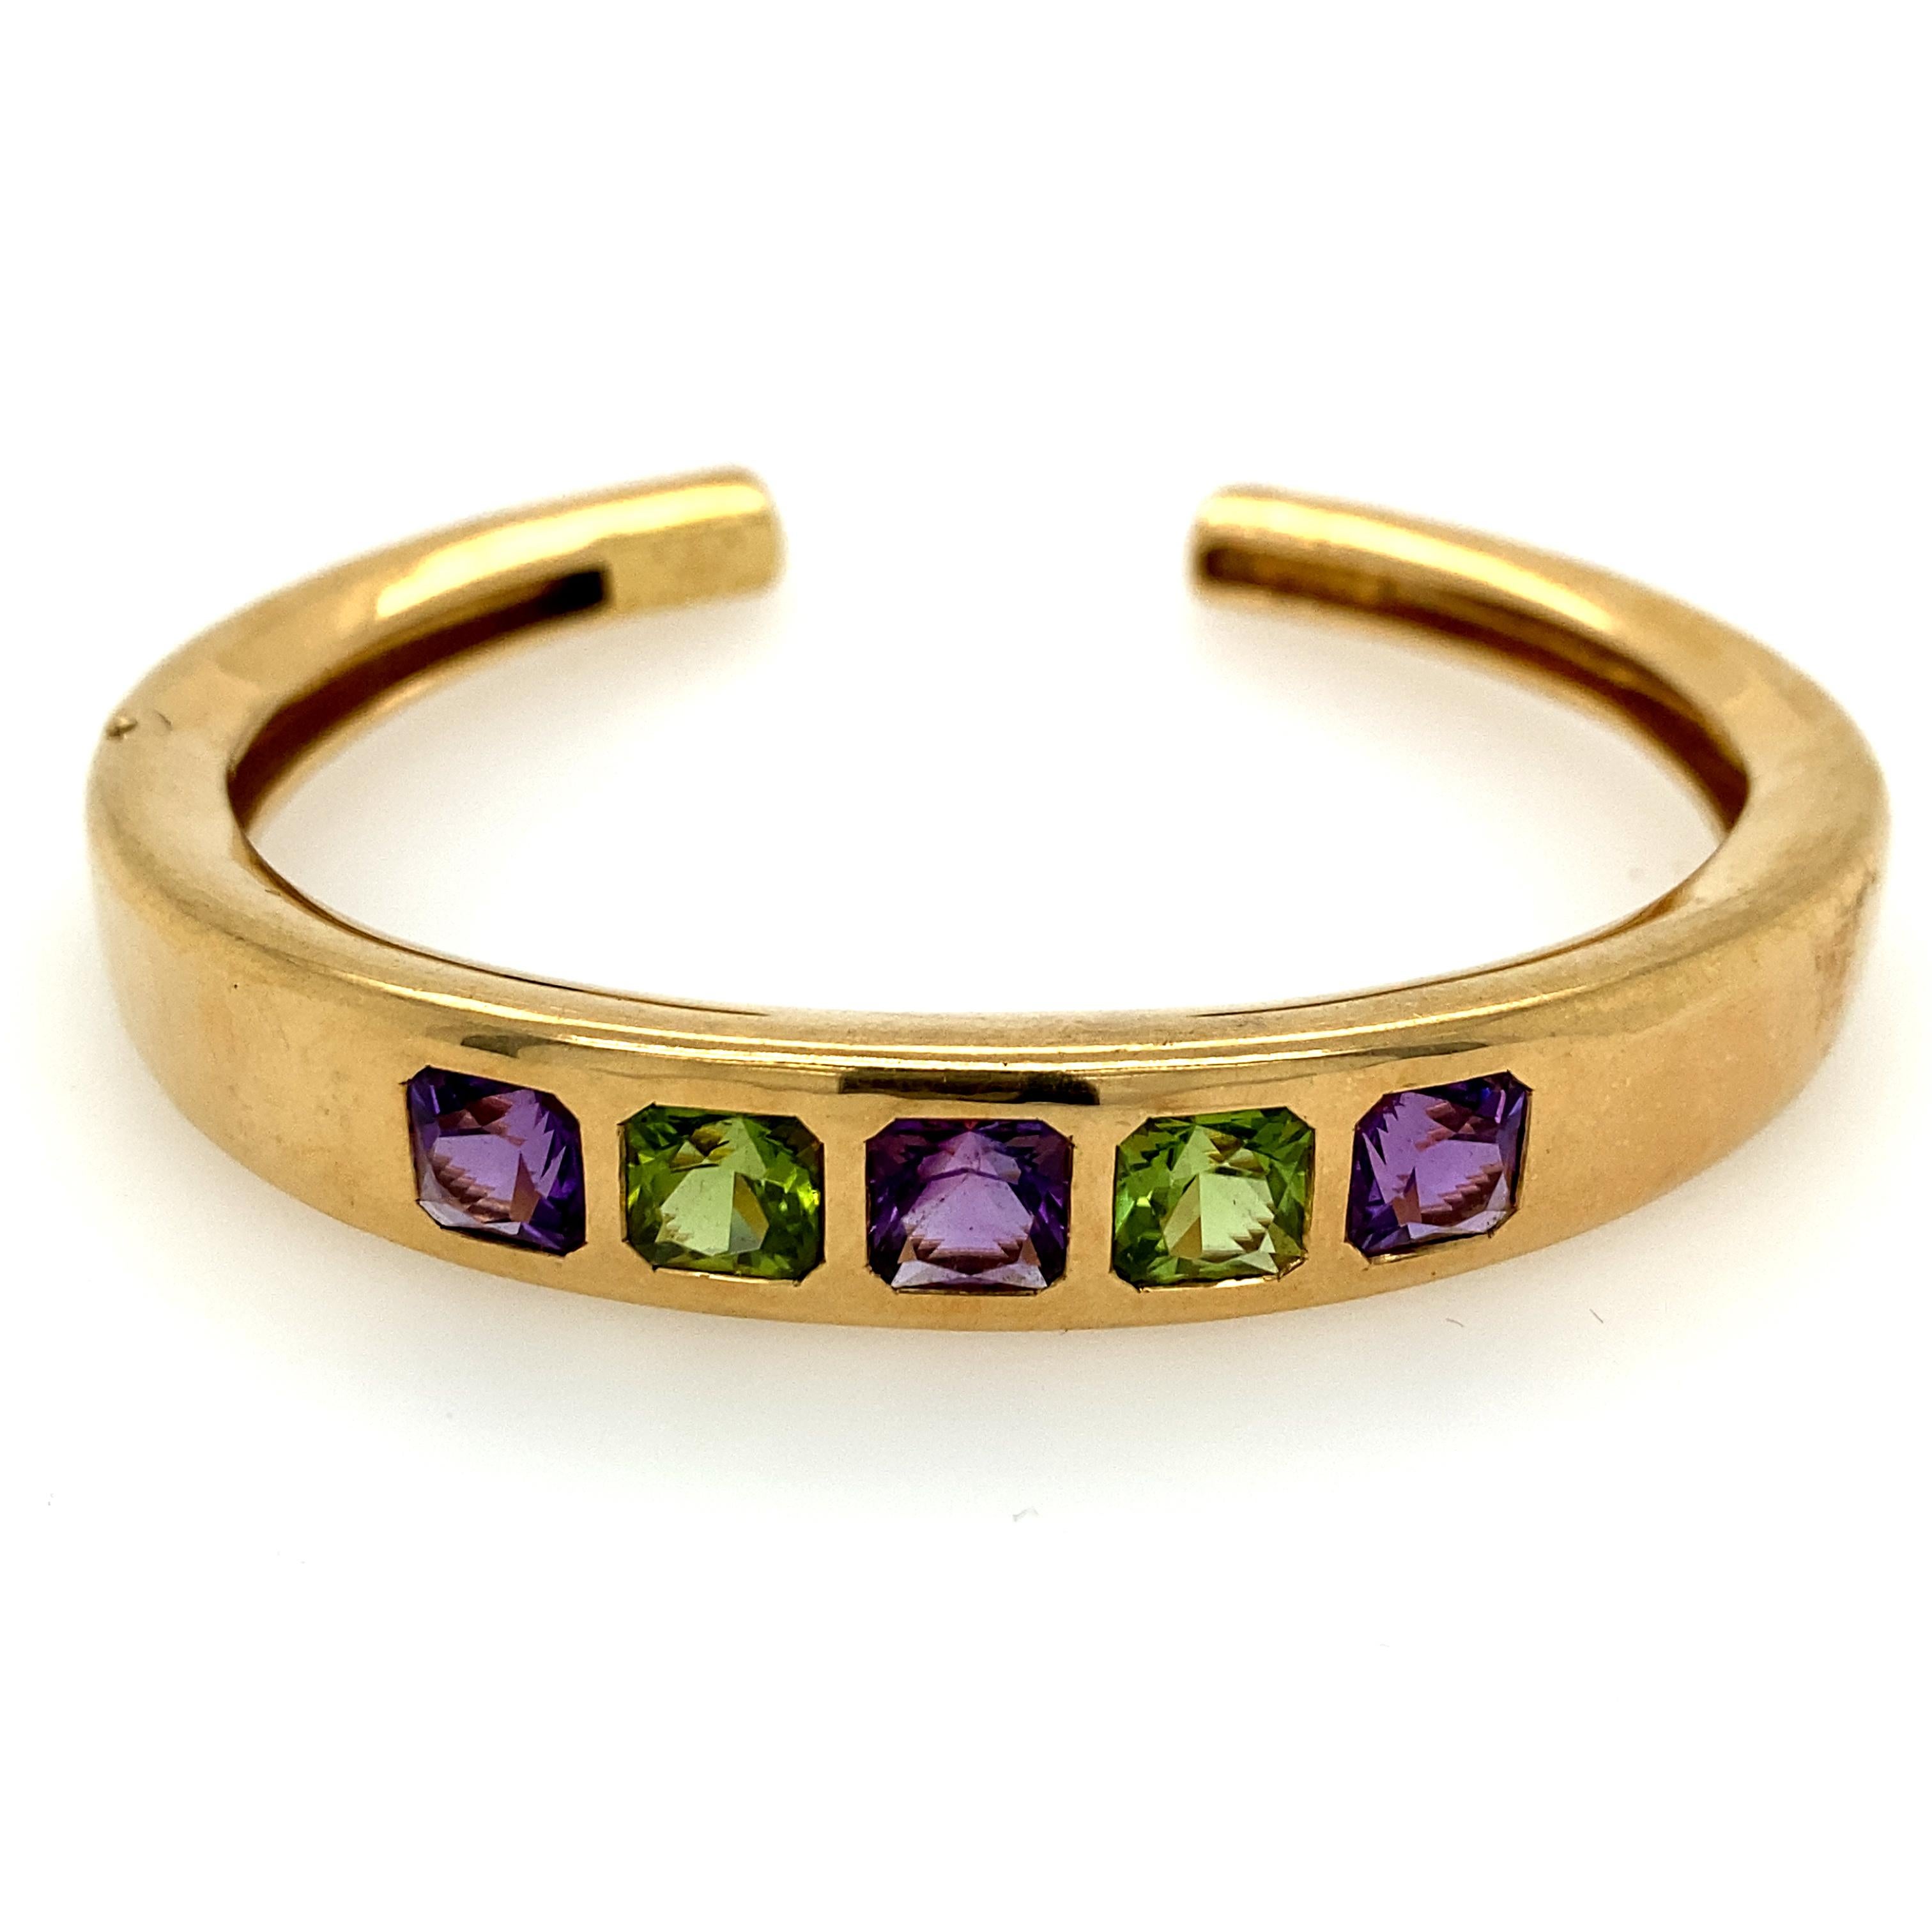 Van Cleef and Arpels 18k Yellow Gold Bracelet with Gem Stones. There are three square-cut amethysts and two square-cut peridots. The bracelet is signed VCA 750 B2612D3. The bangle has a hinged opening and a safety clip.